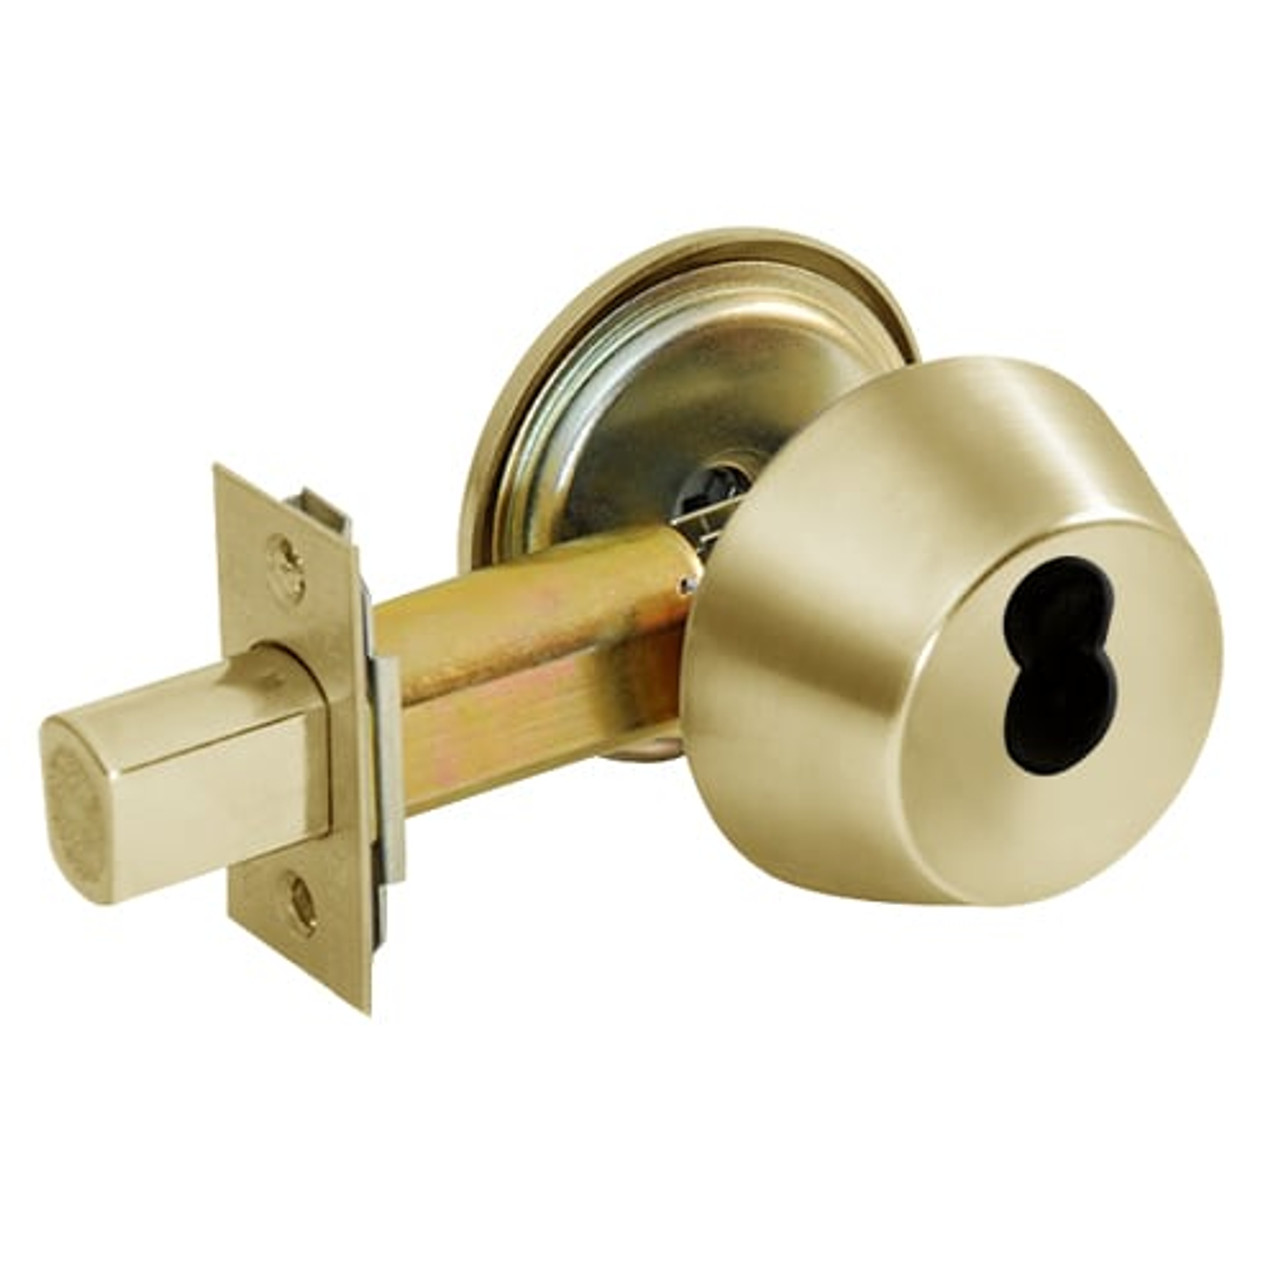 DL3217-606-CL7 Corbin DL3200 Series Classroom Cylindrical Deadlocks with Single Cylinder in Satin Brass Finish